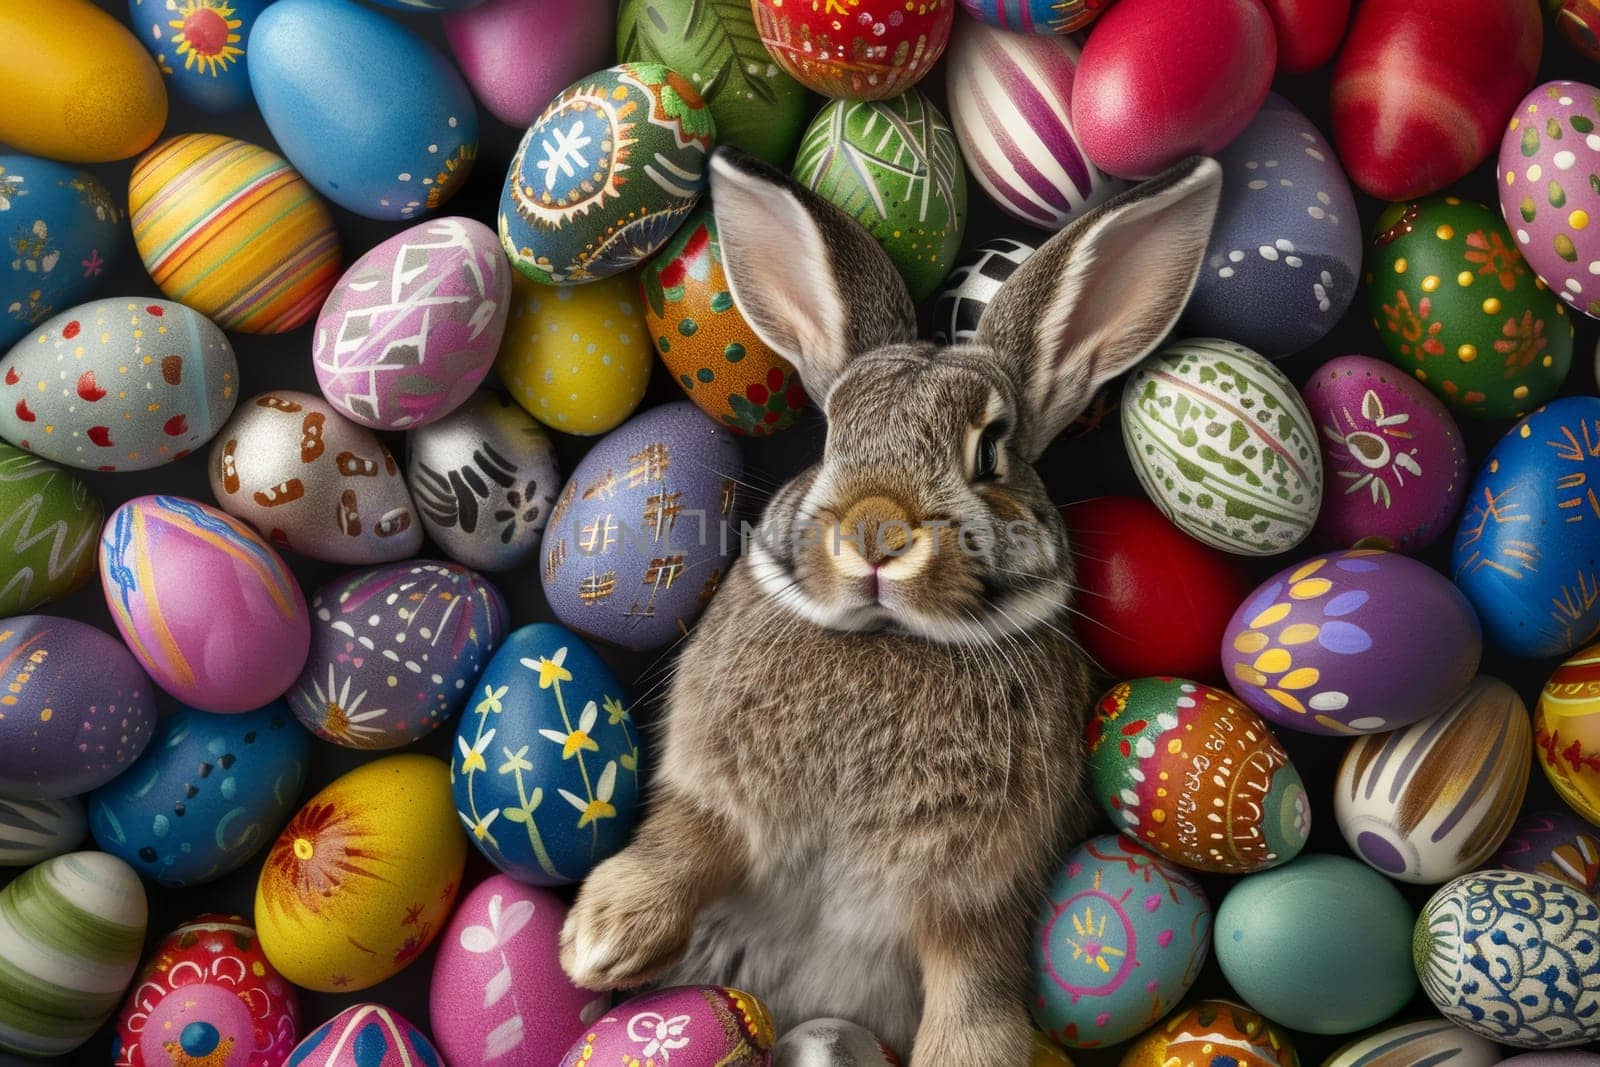 A rabbit is laying in a pile of colorful Easter eggs. The eggs are painted in various colors and patterns, creating a festive and playful atmosphere. The rabbit's presence adds a sense of curiosity